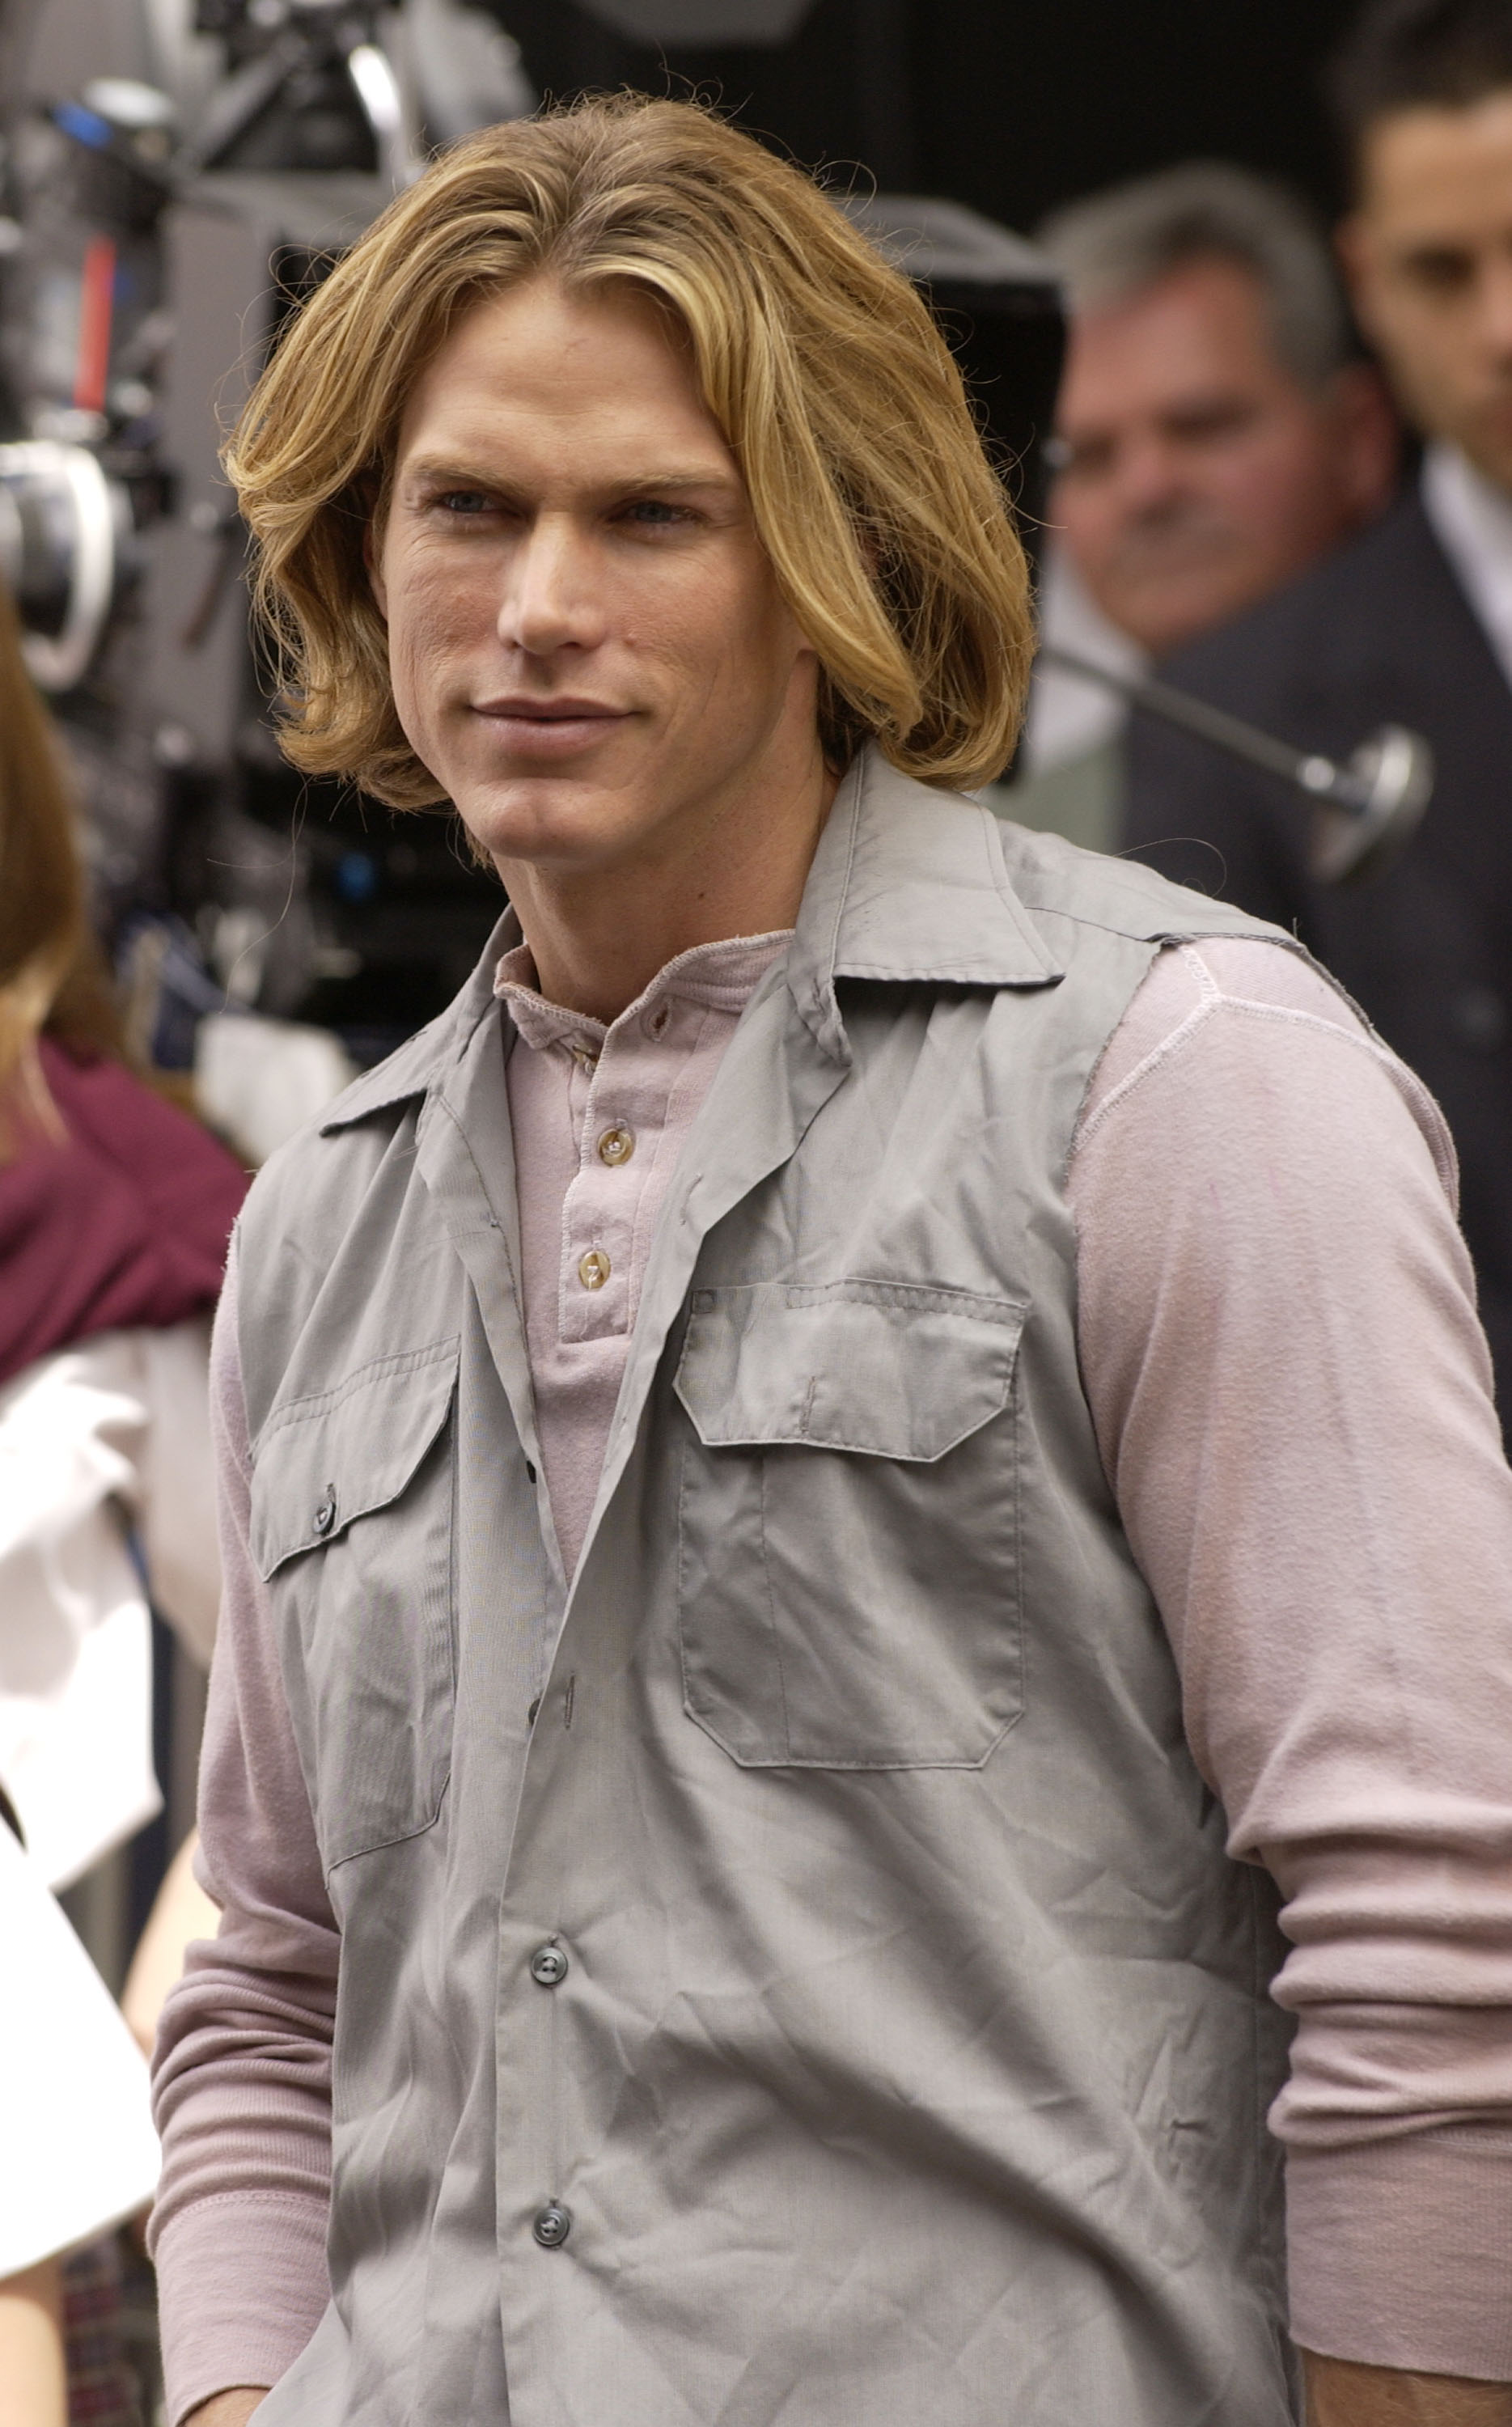 Jason Lewis as Smith Jerrod stands on a street corner on the Upper West Side during the filming of 'Sex and the City'